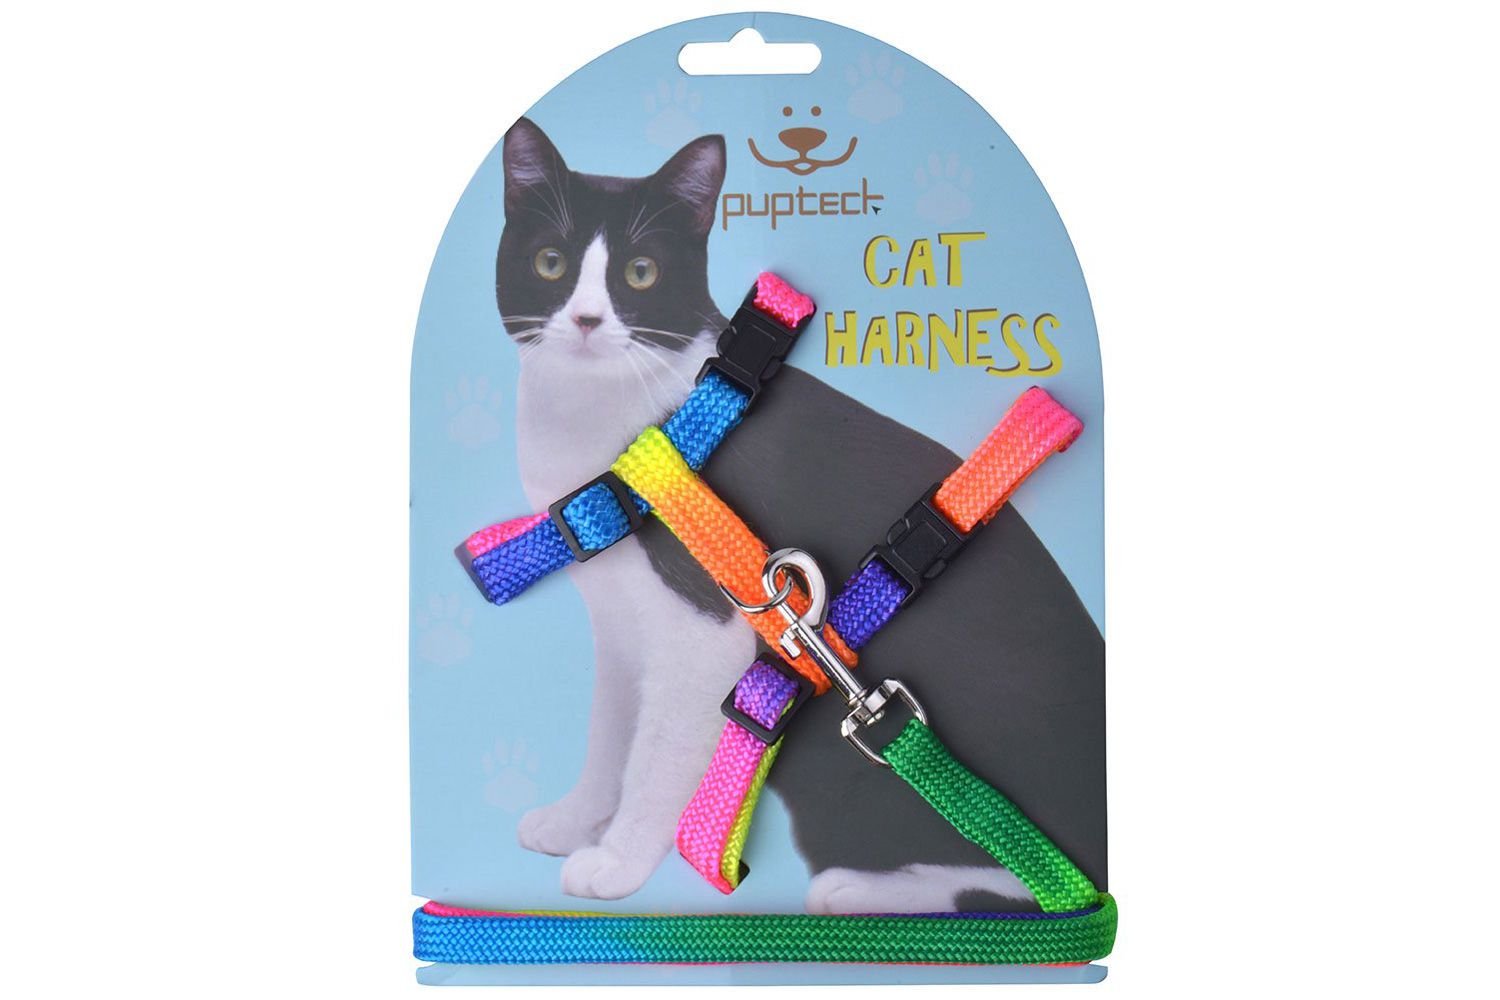 Training a cat to use a leash requires a sturdy and lightweight cat harness.